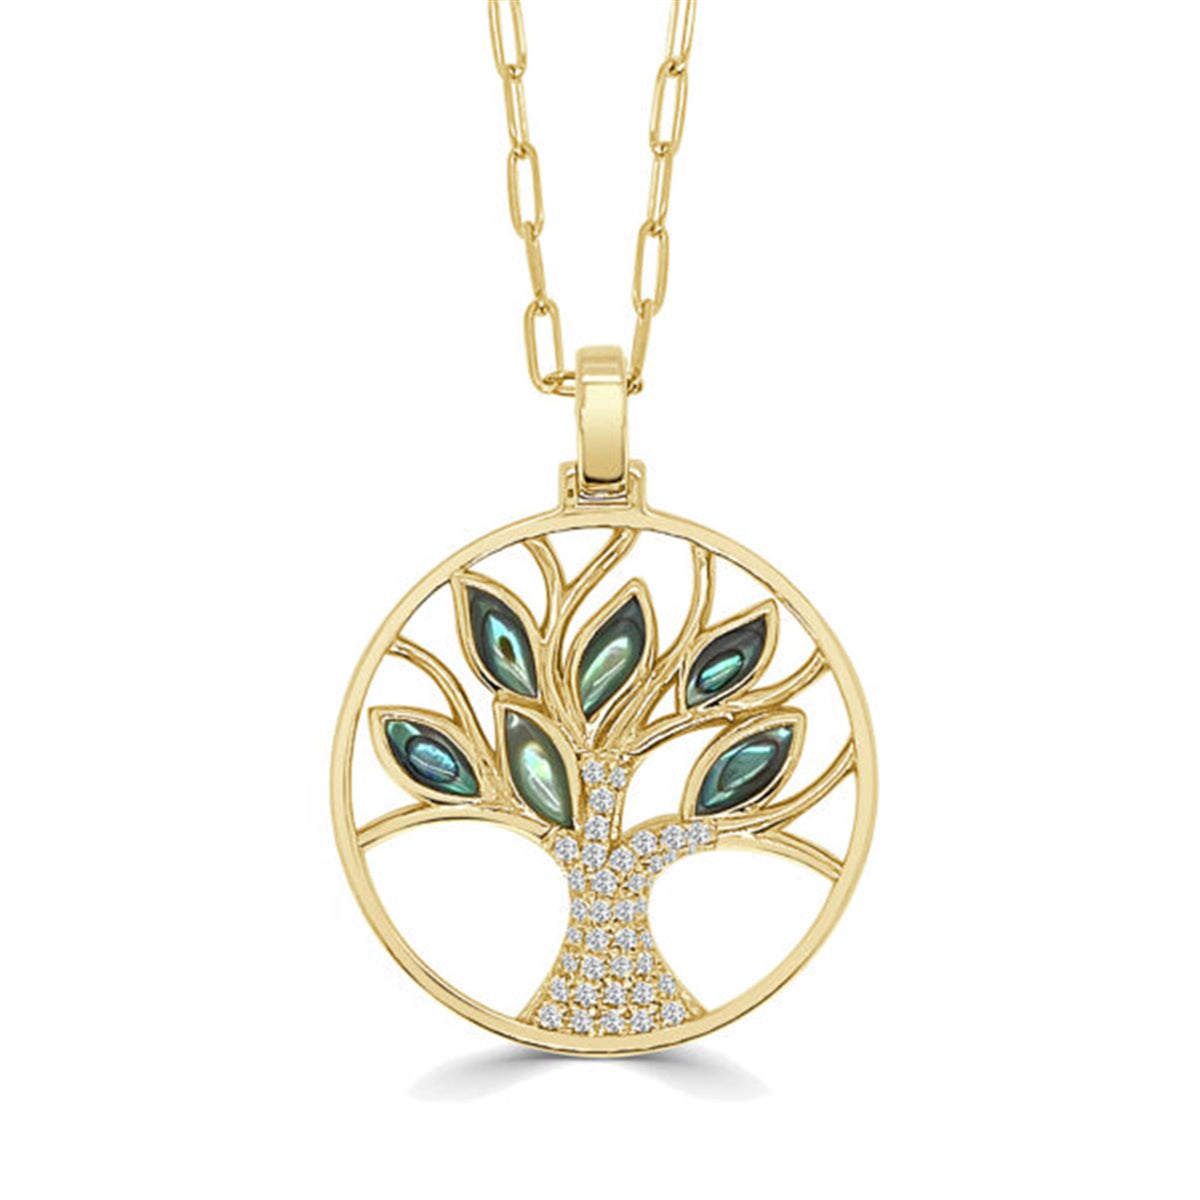 Frederic Sage 14K Yellow Gold Tree of Life Pendant With Abolone Inlay and 0.18cttw Natural Diamonds